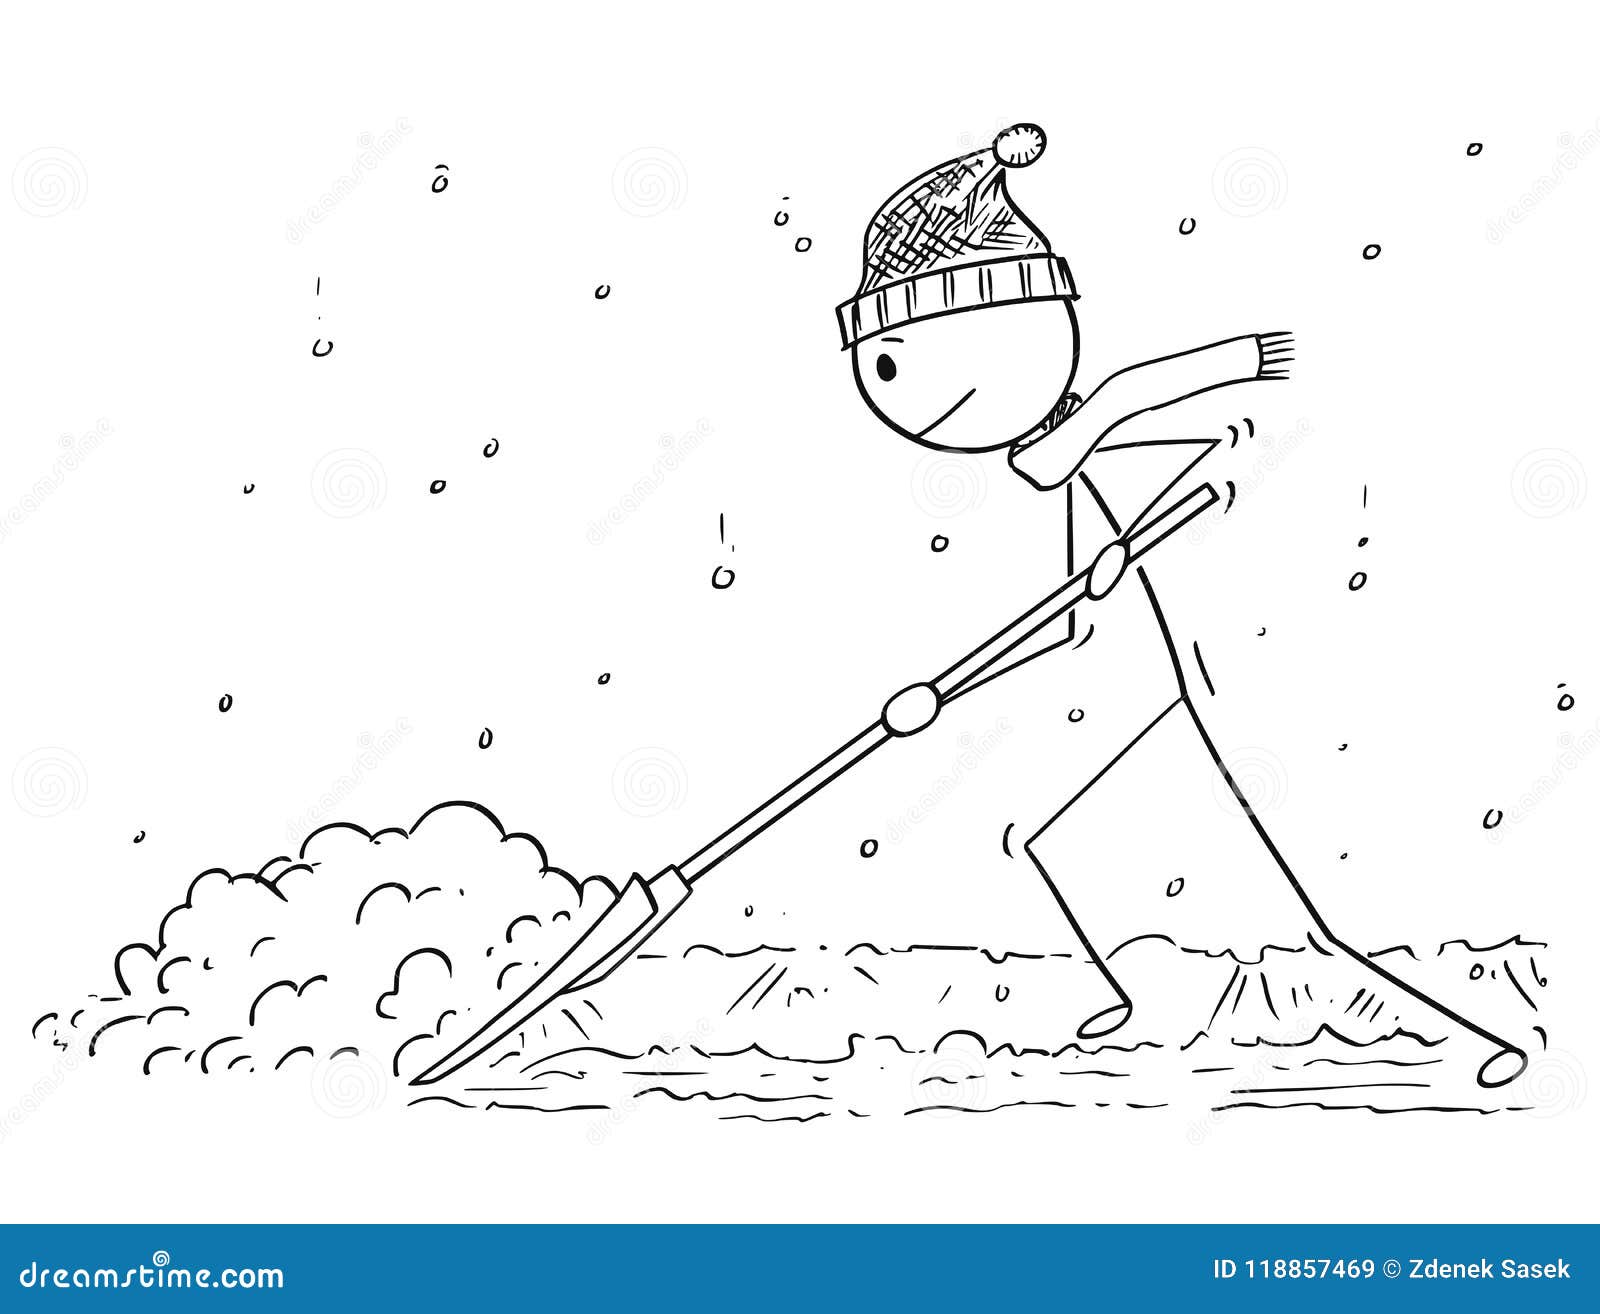 cartoon of man with snow pusher shoveling the snow